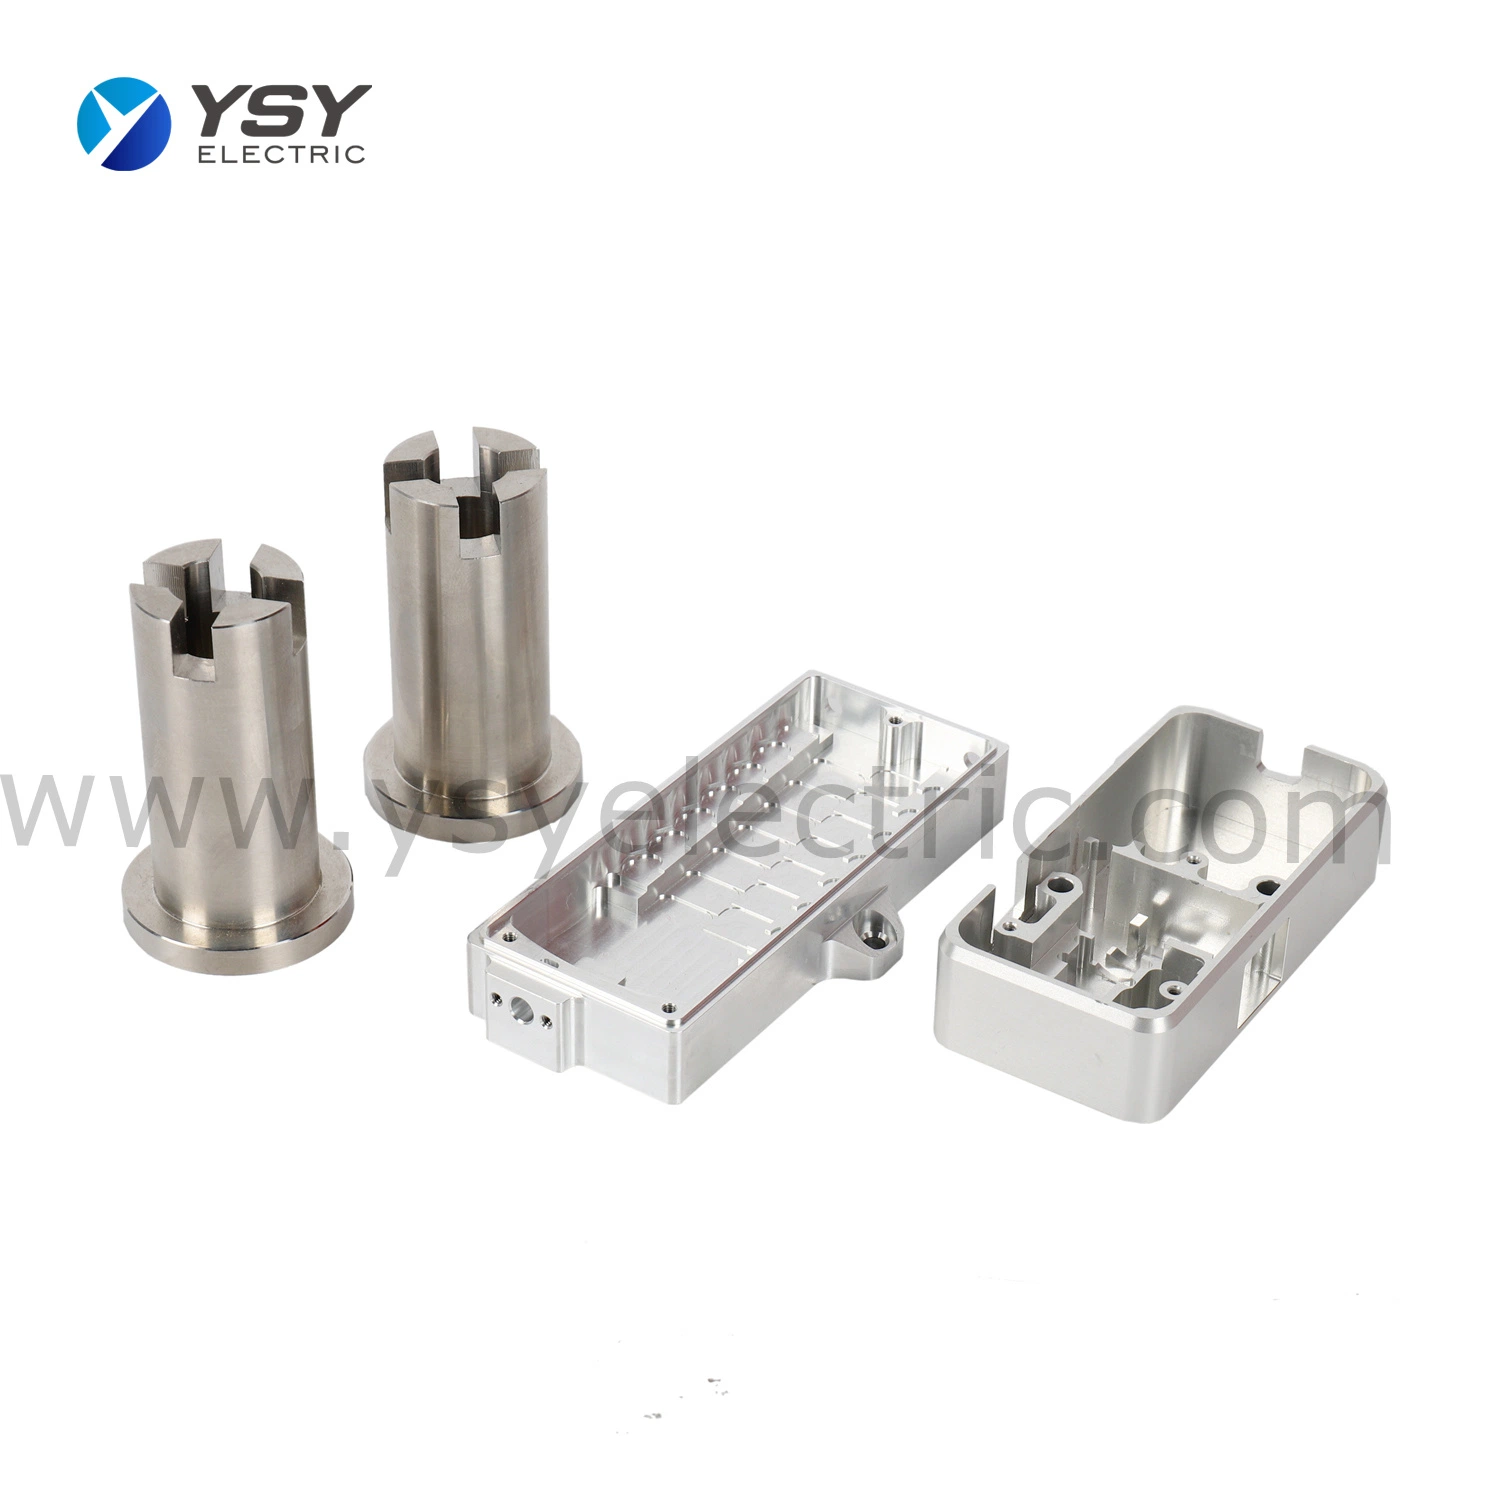 Precision CNC Car Conversion Kit Electronic Milling Metal Accessories Micro Turned Aluminum Stainless Steel Machining Spare Parts Fabrication Auto Motorcycle